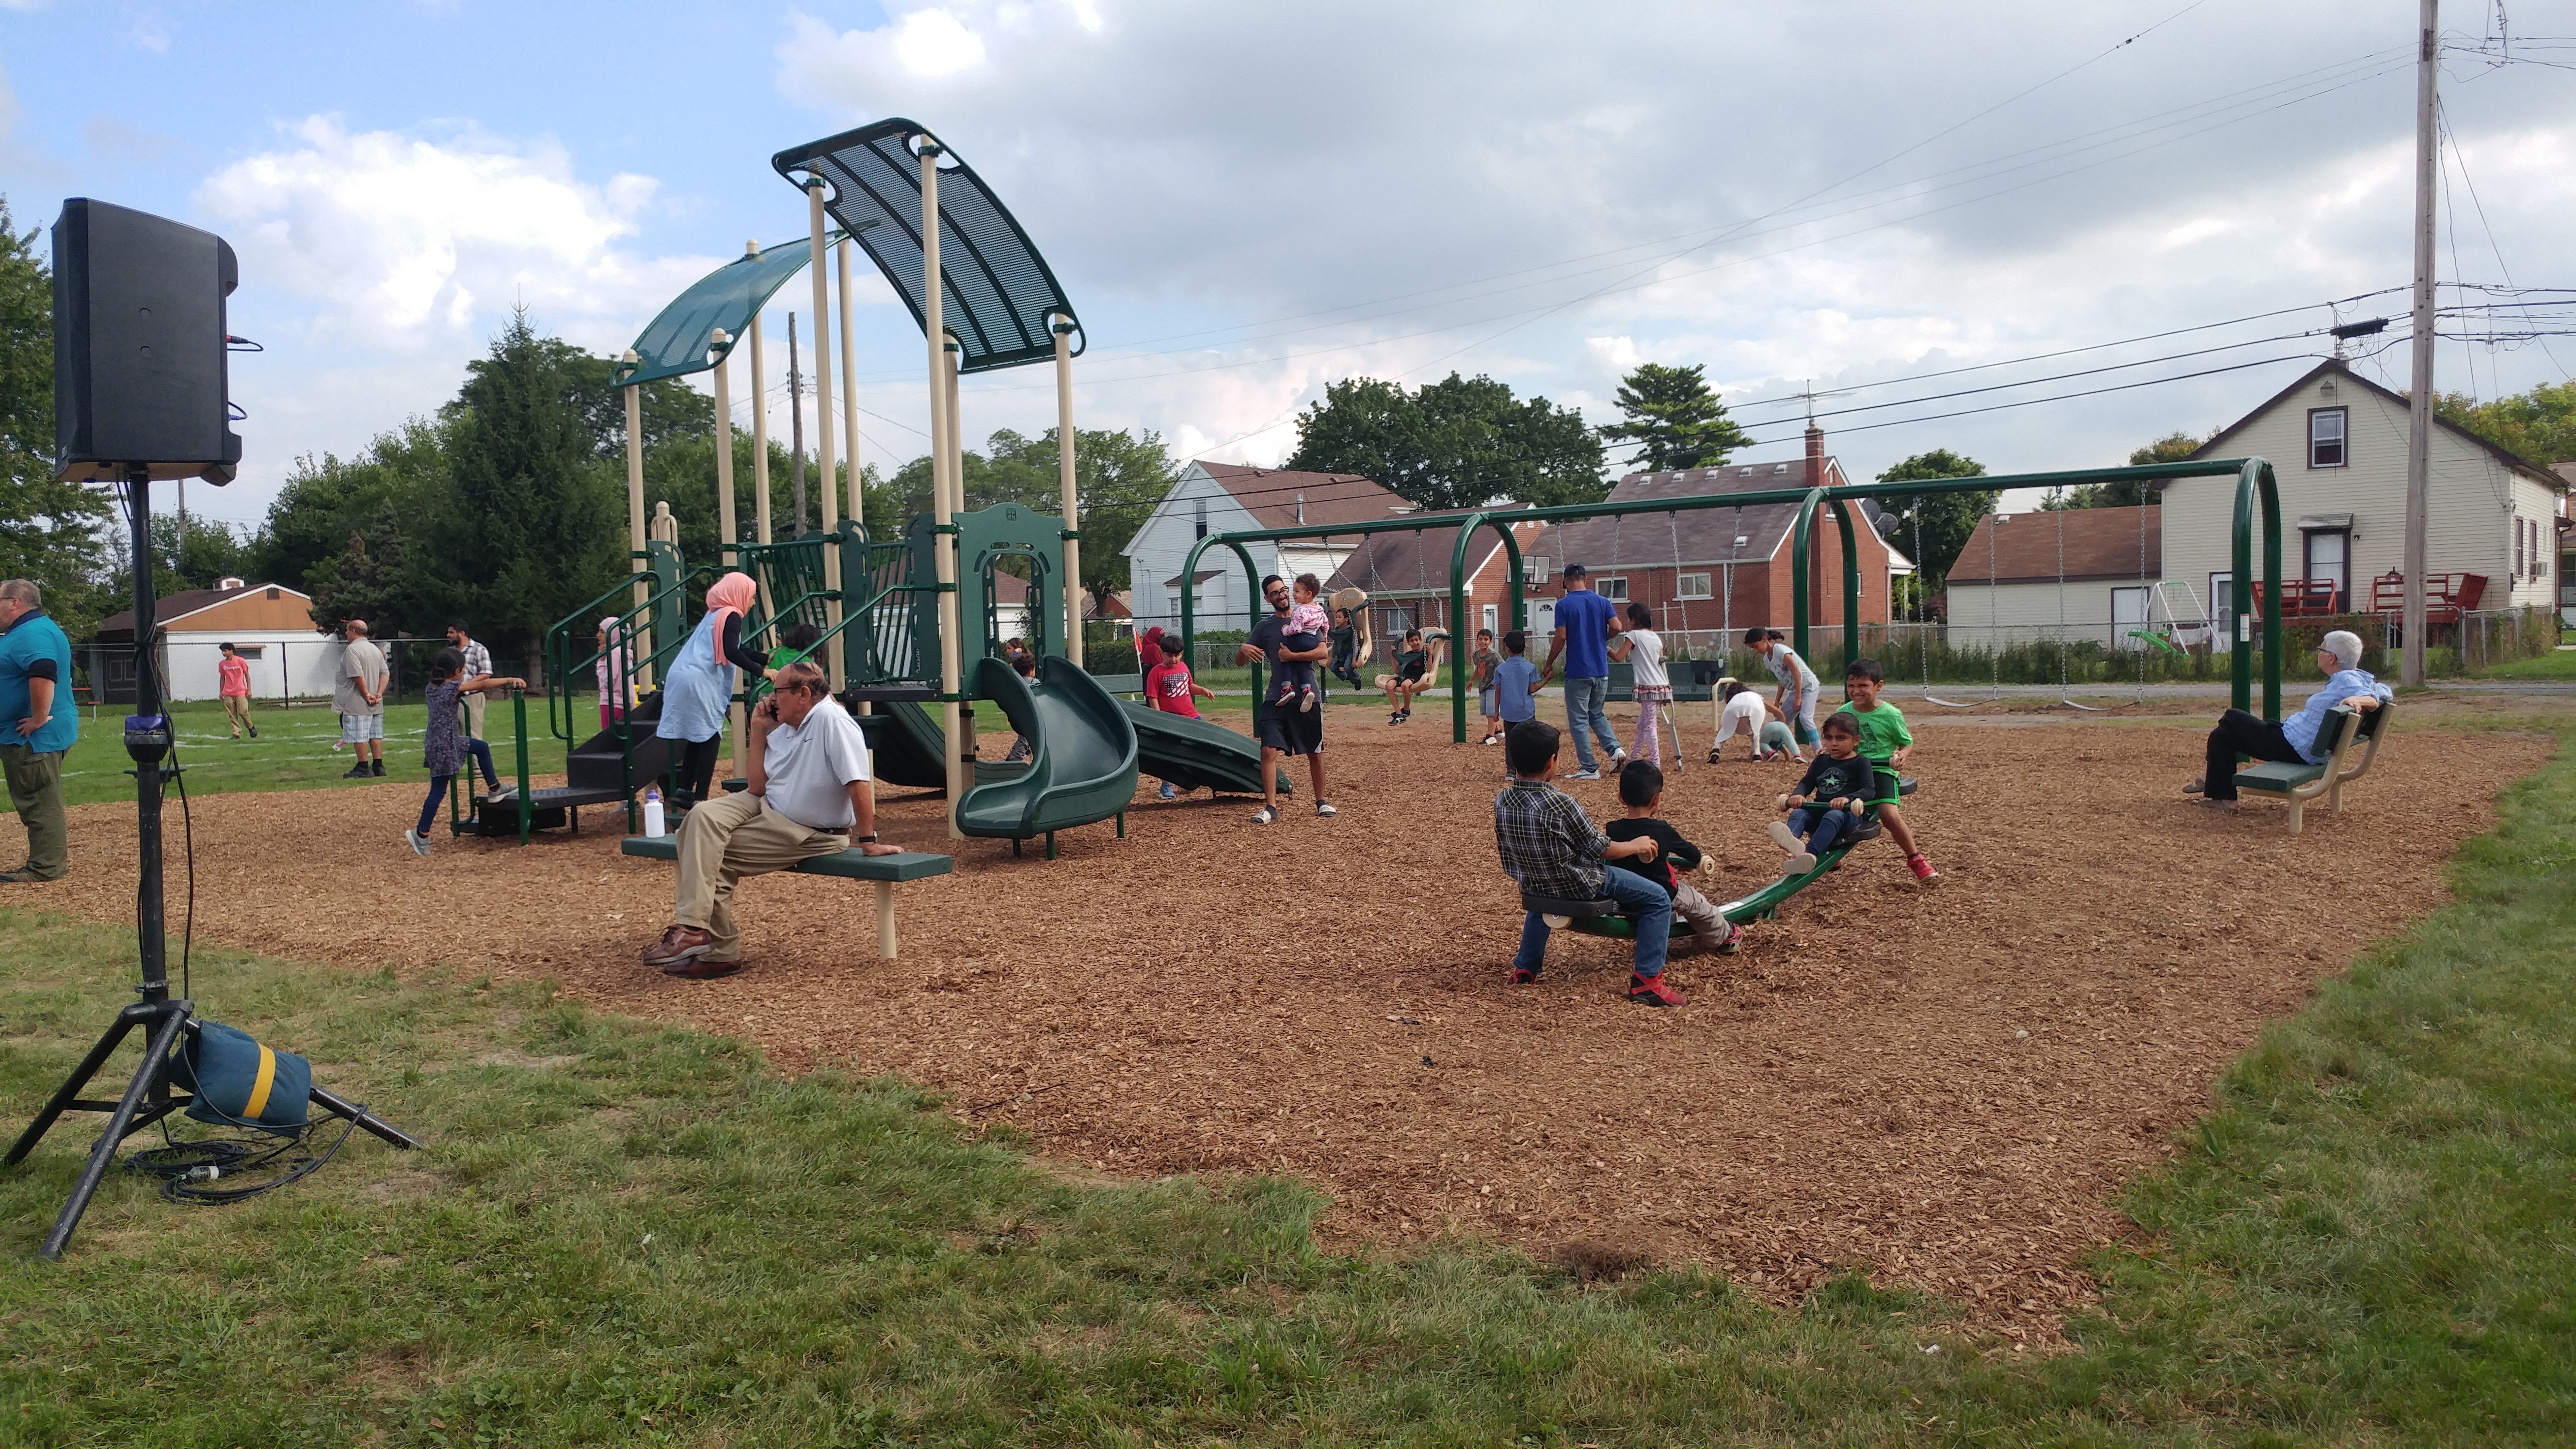 Image of Graham Street Park, showing several children enjoying a play structure, swing set and see-saw